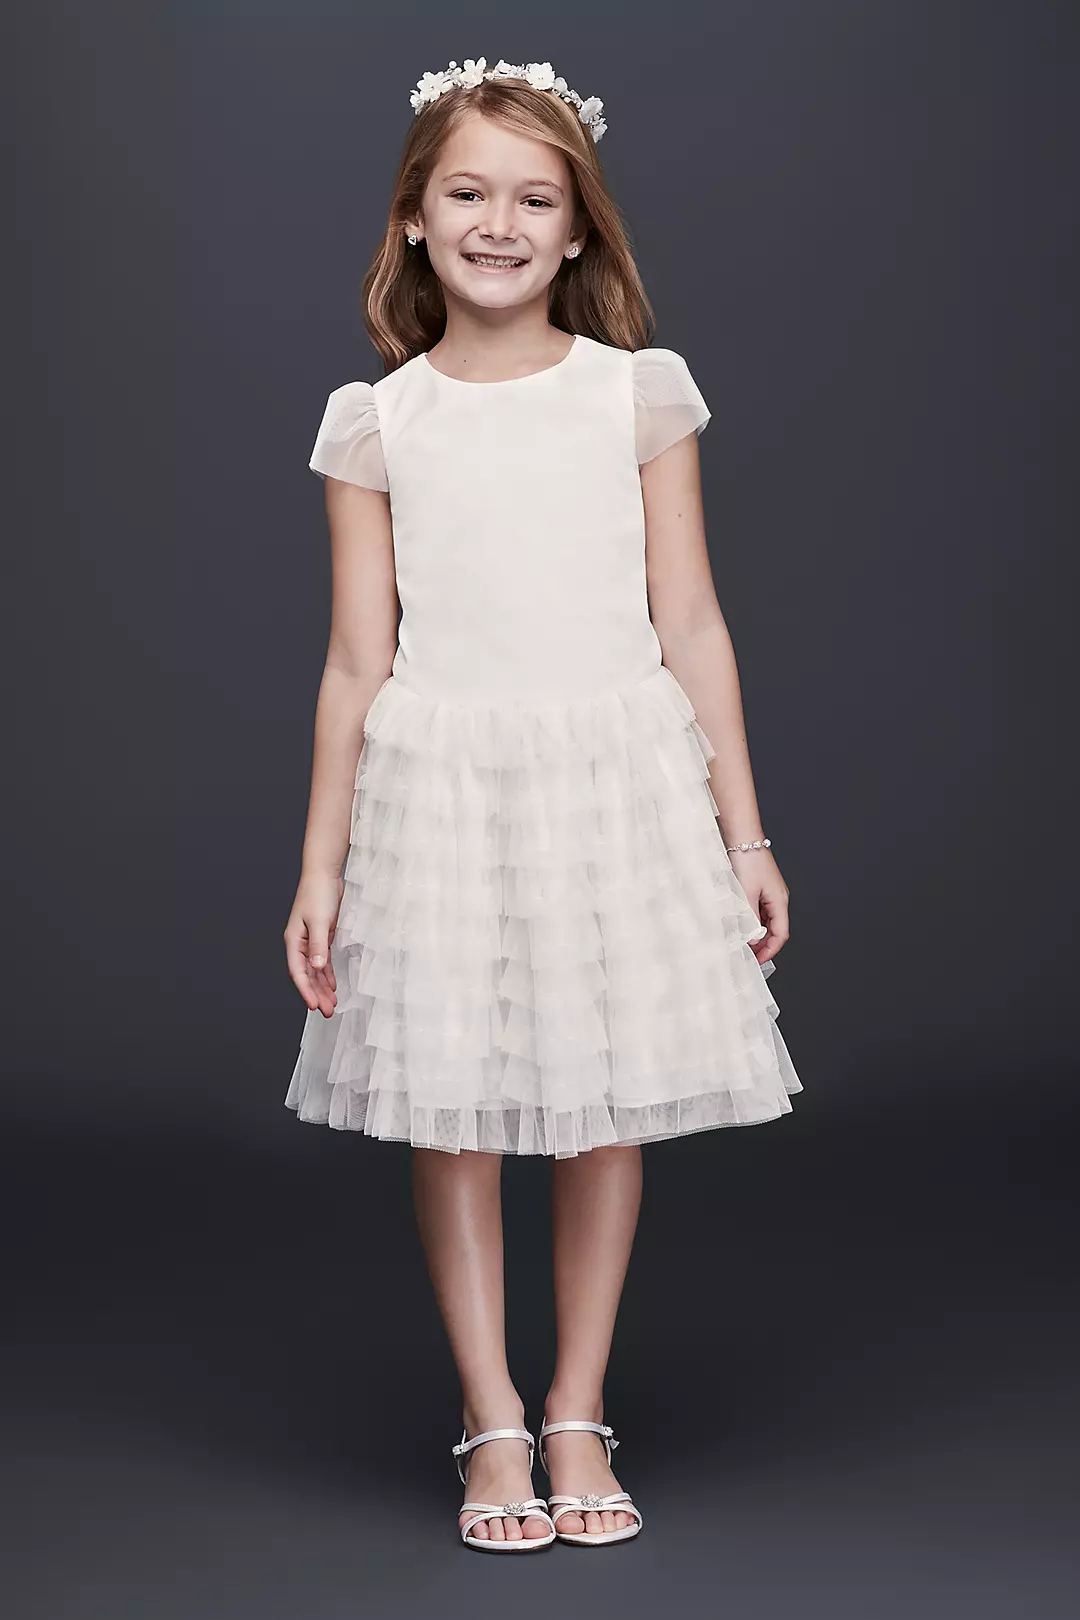 Tulle Flower Girl Dress with Tiered Ruffle Skirt Image